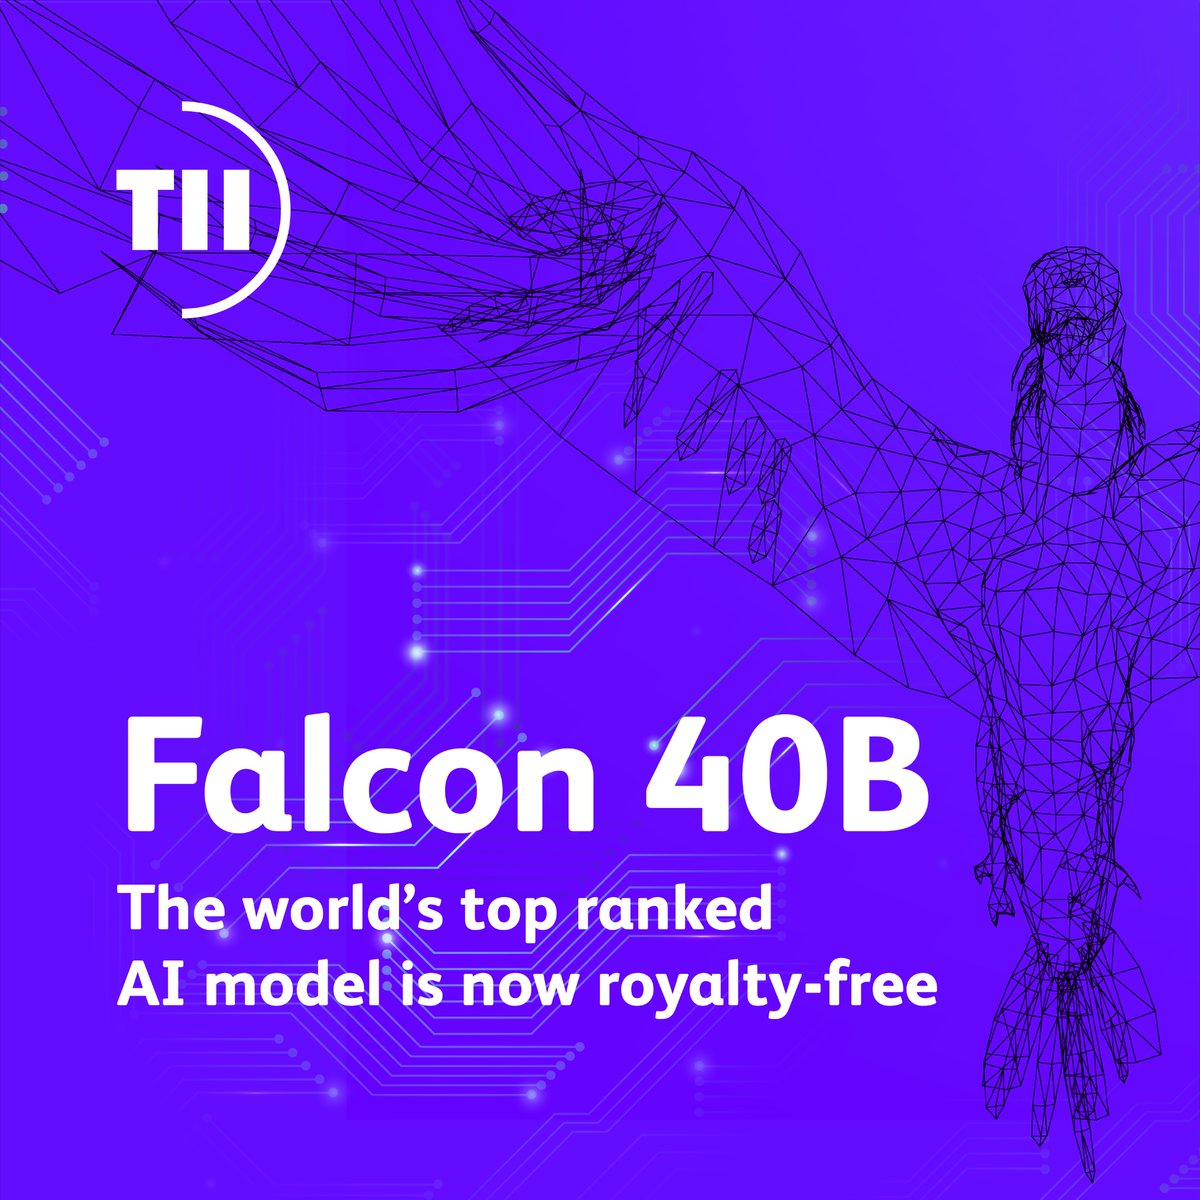 UAE's Falcon 40B, the world's top ranked open-source AI model from the Technology Innovation Institute (TII) has waived royalties on its use for commercial and research purposes.

#TII #LLM #FalconLLM #Tech #Innovation #AI #AbuDhabi #UAE